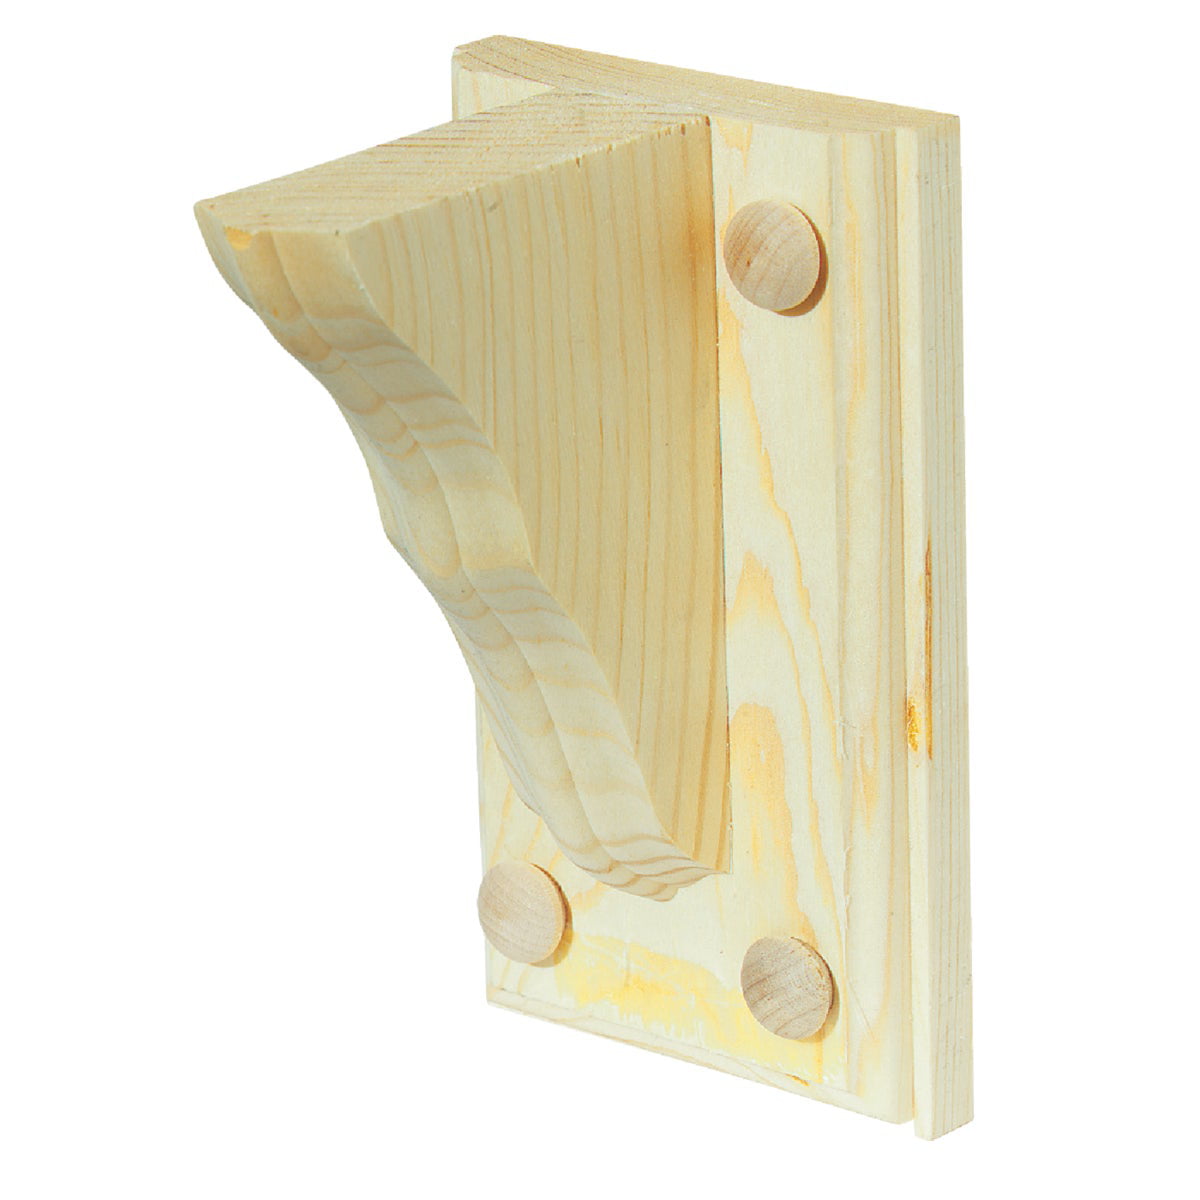 Natural Wood Shelf Bracket with Backplate H Waddell 4 In D x 6 In 